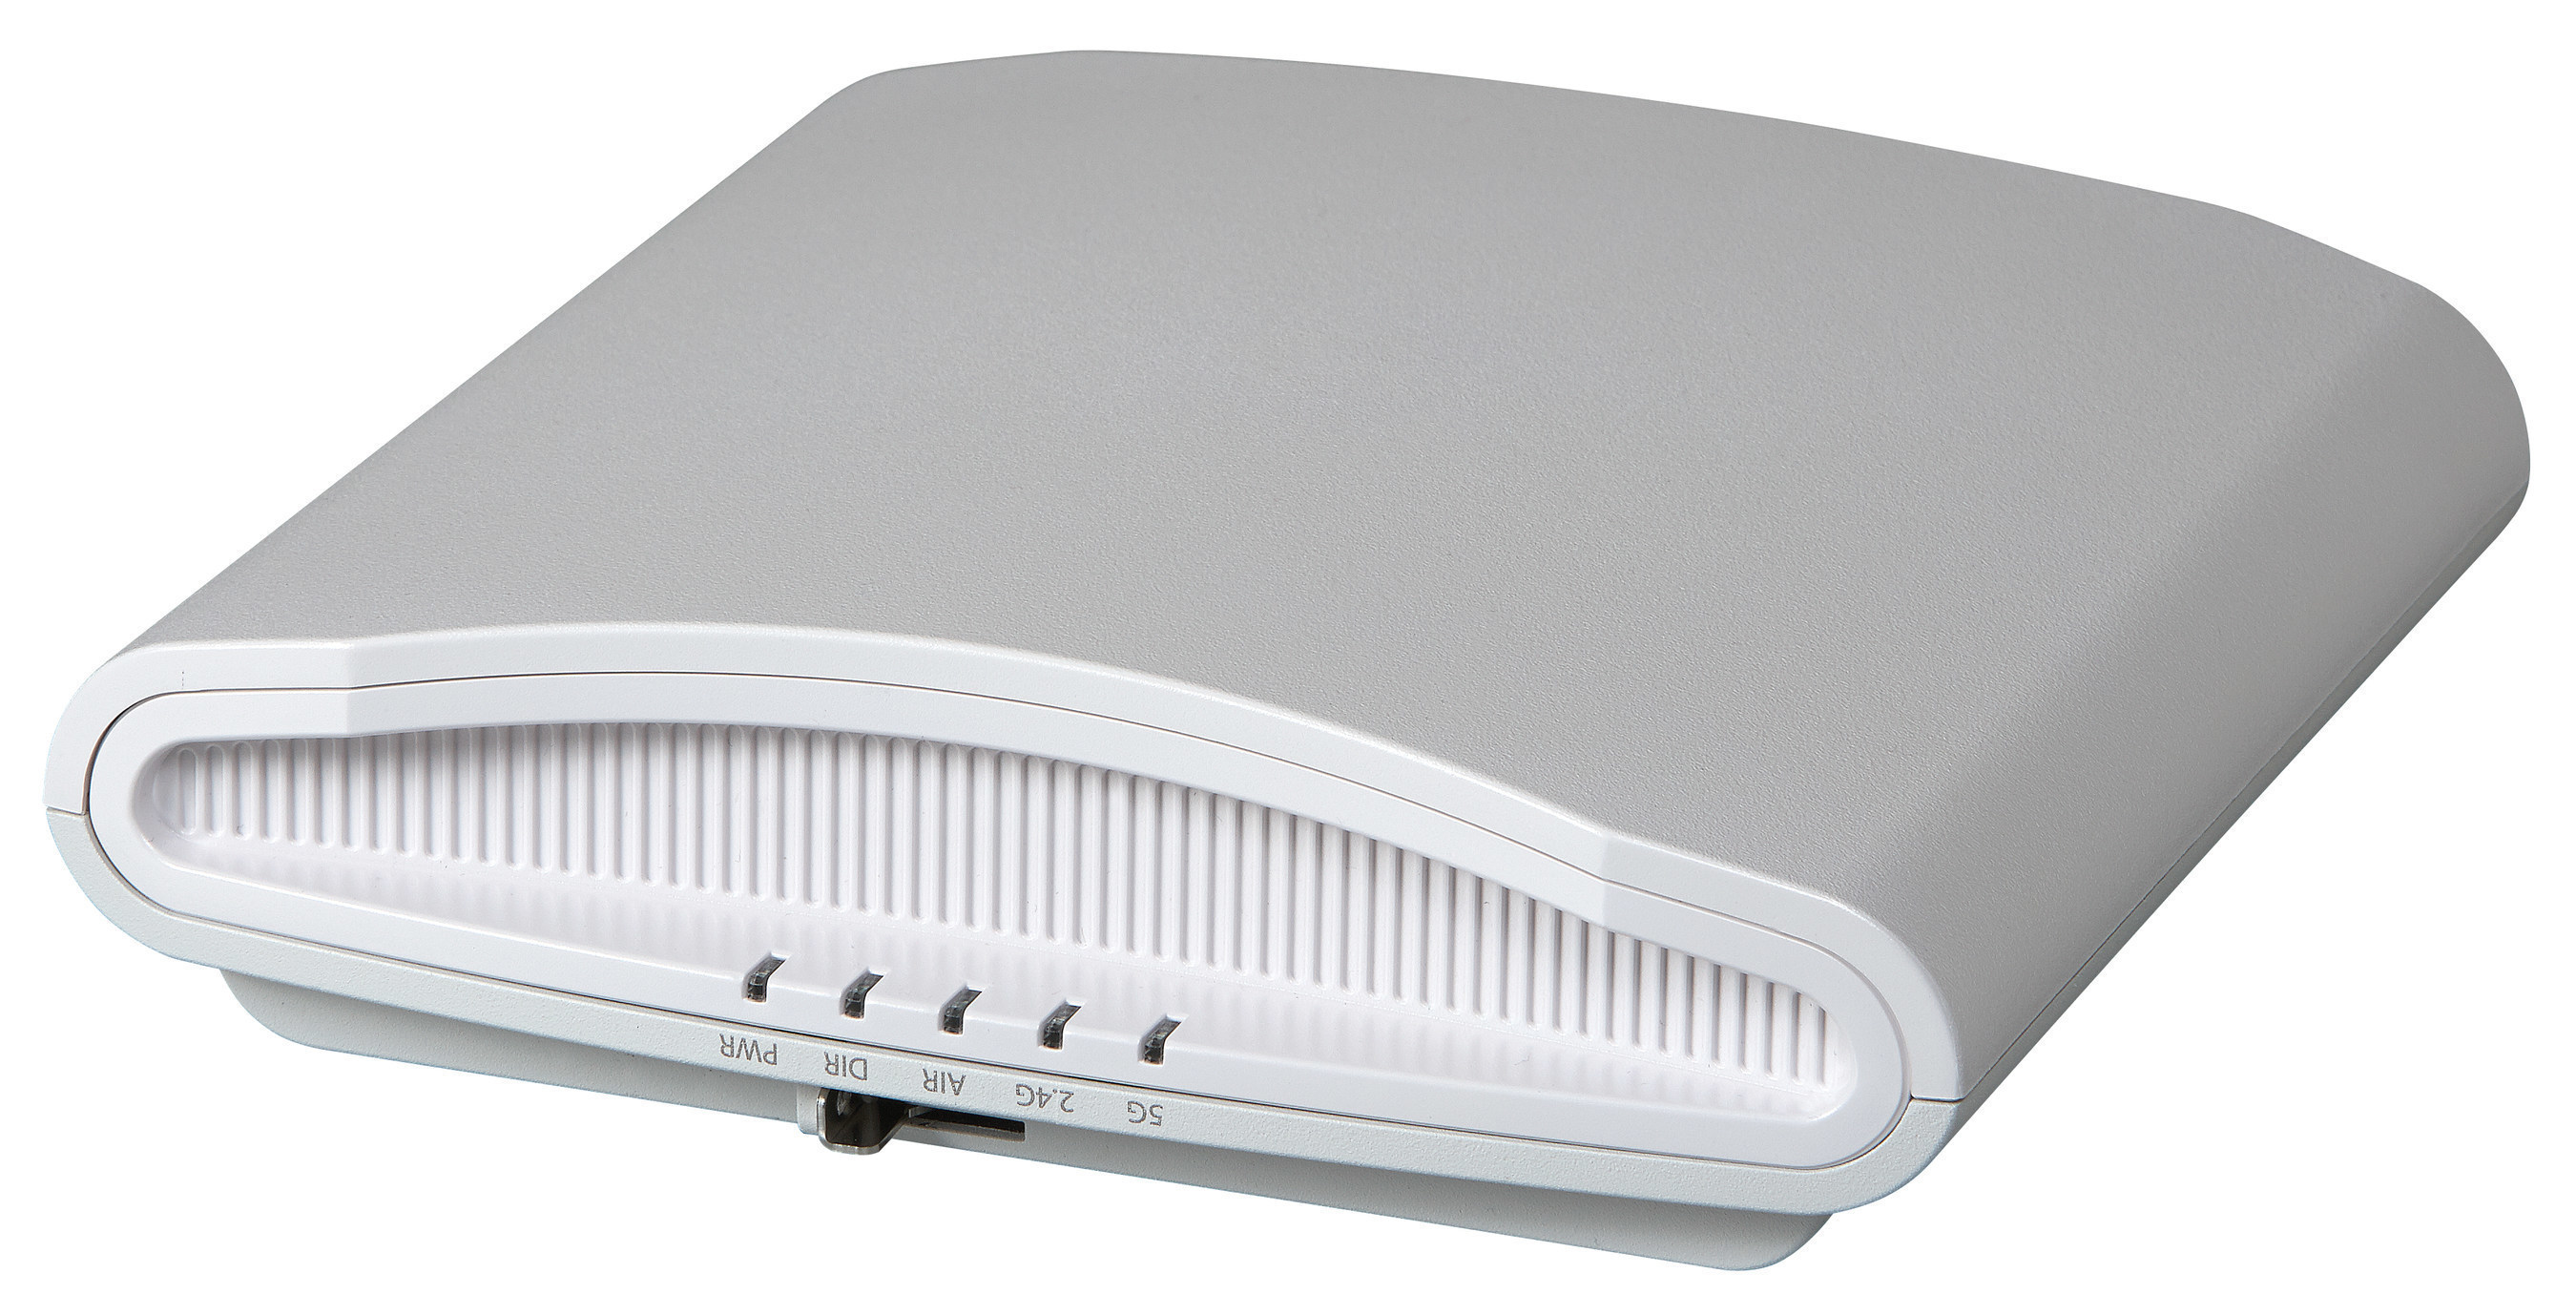 The New Ruckus ZoneFlex R710 - the Wi-Fi industry's first 802.11ac Wave 2 Access Point